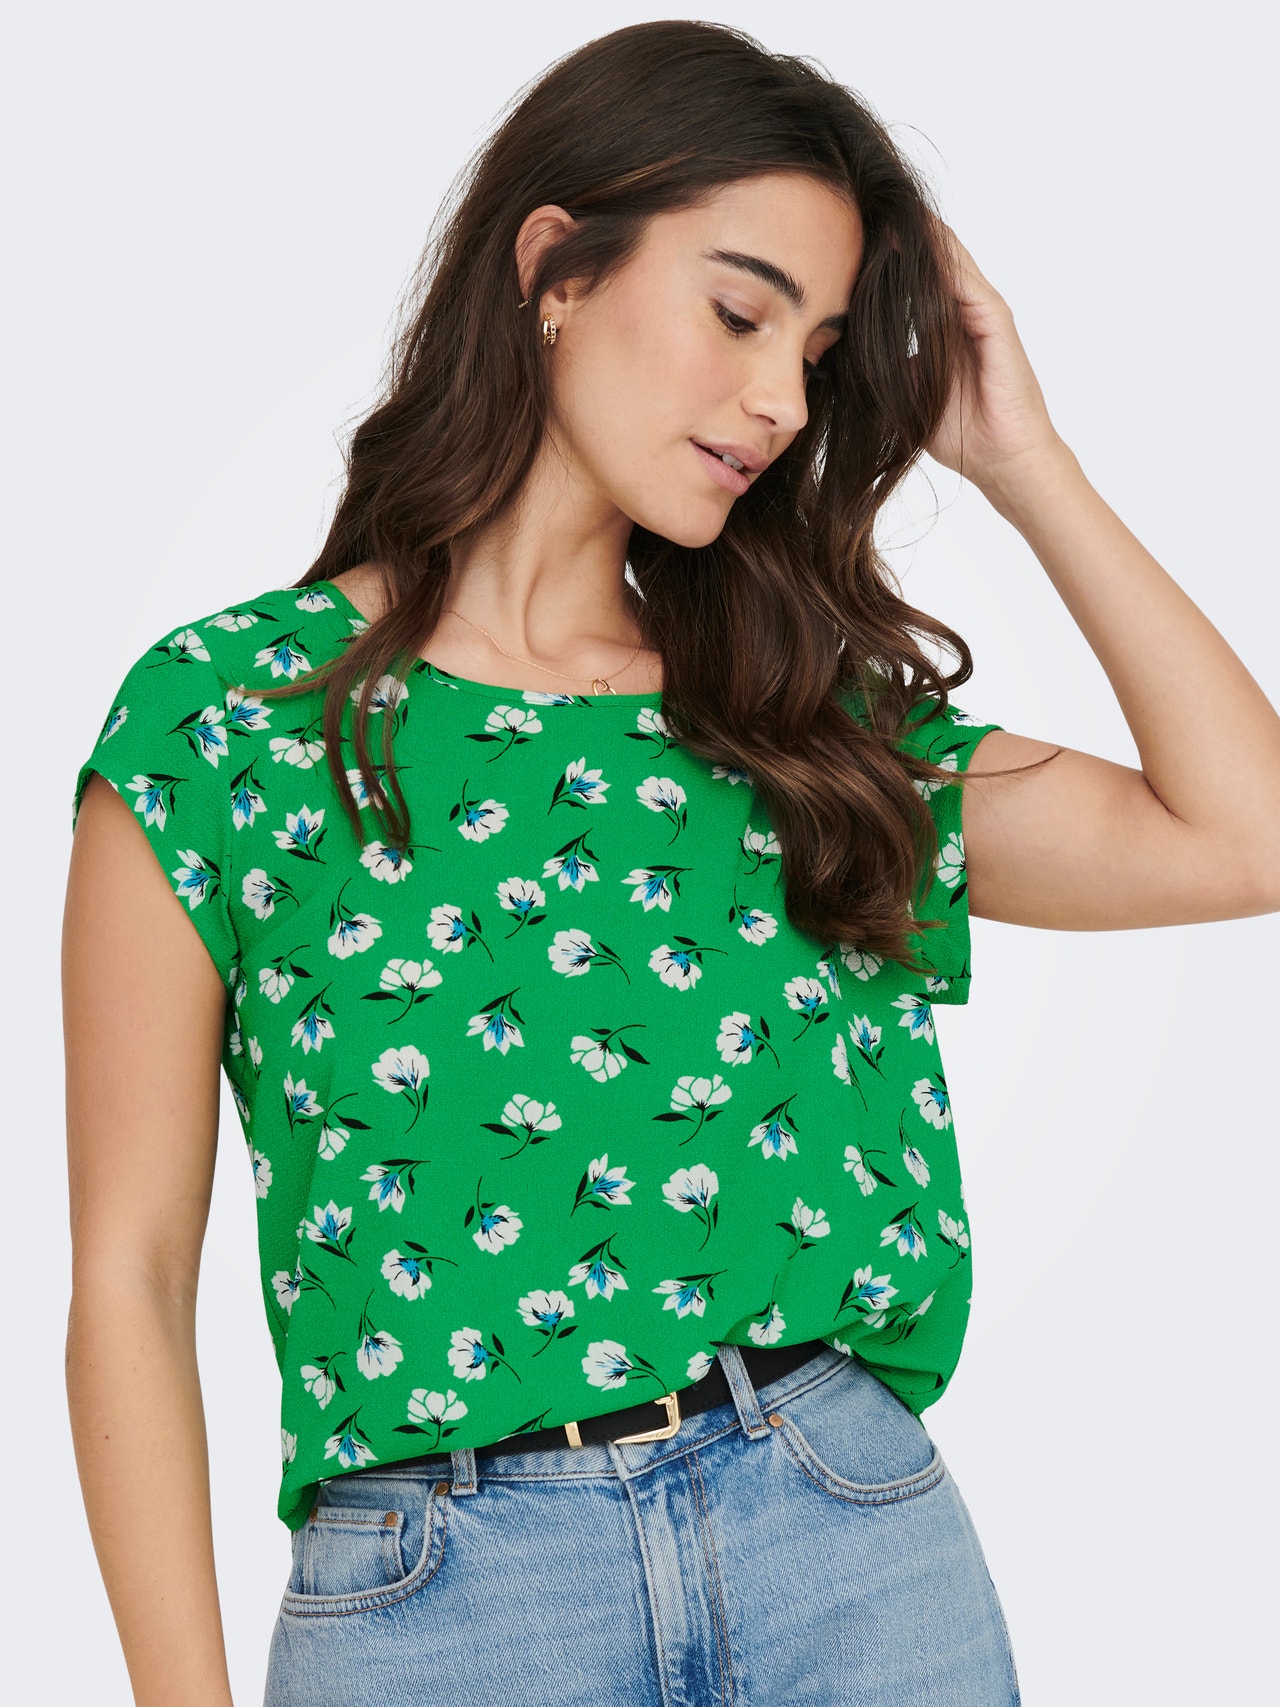 ONLY Printed Short Sleeved Top -Green Bee - 15161116